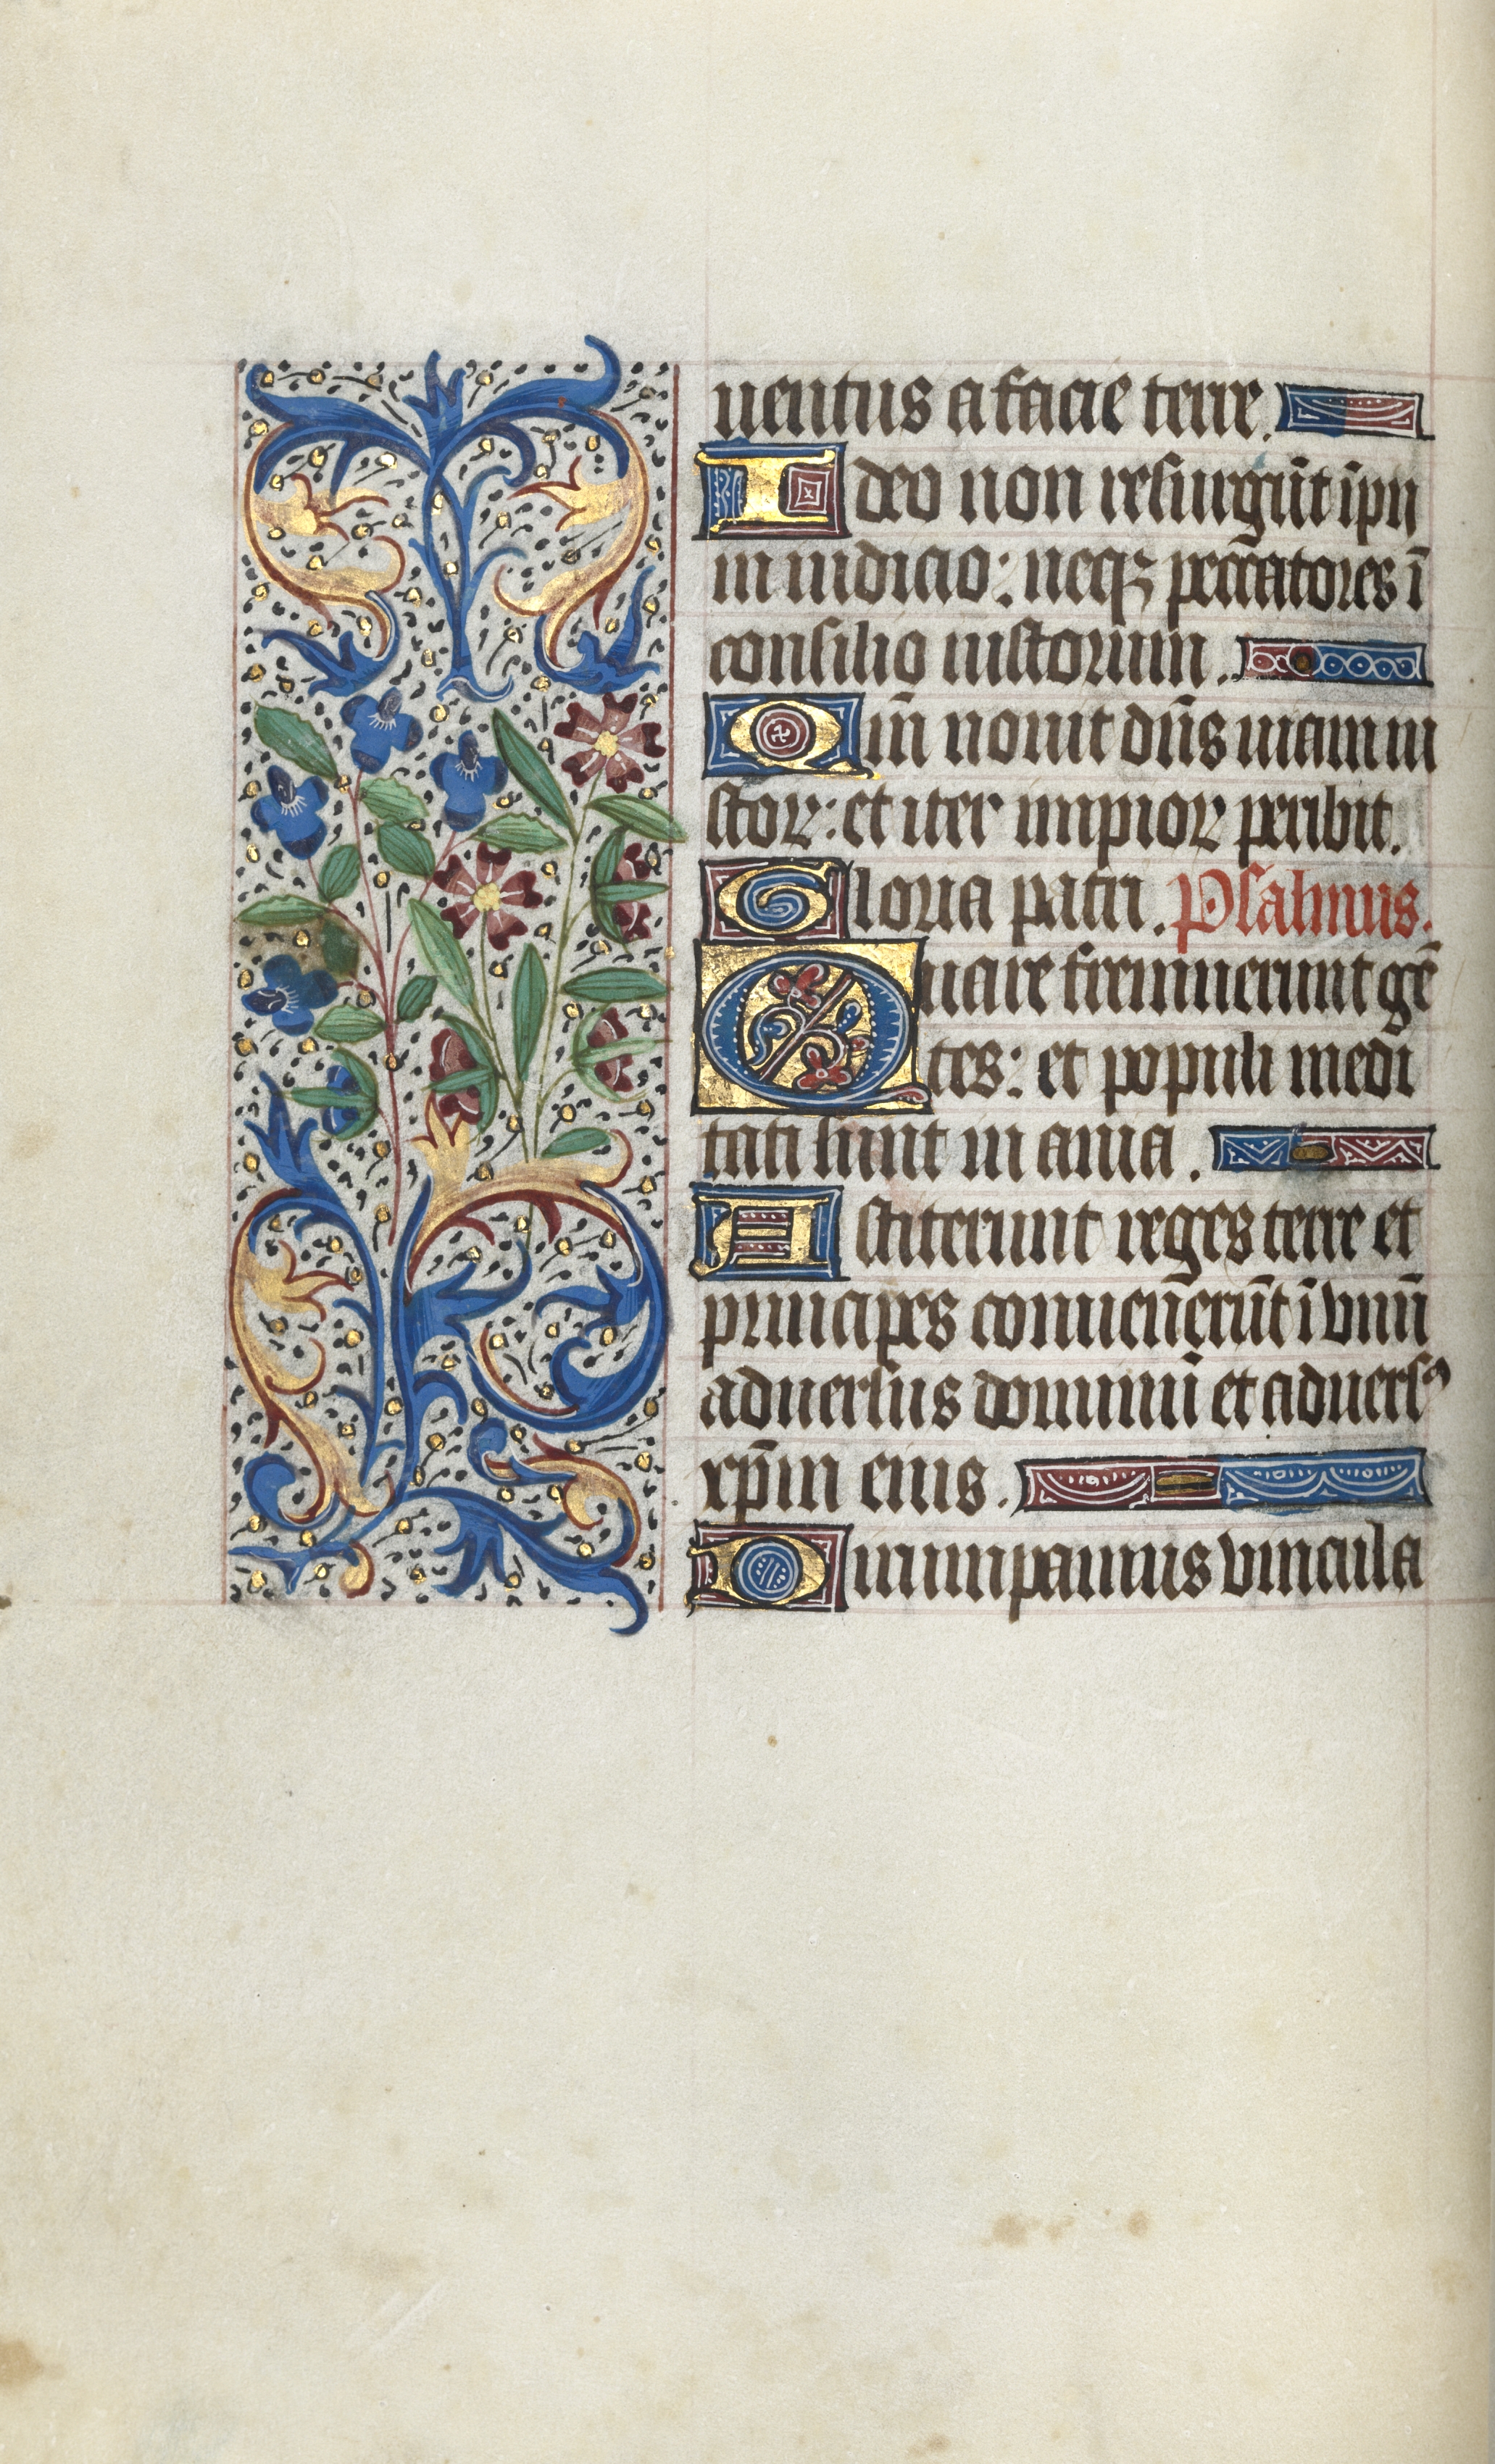 Book of Hours (Use of Rouen): fol. 57v